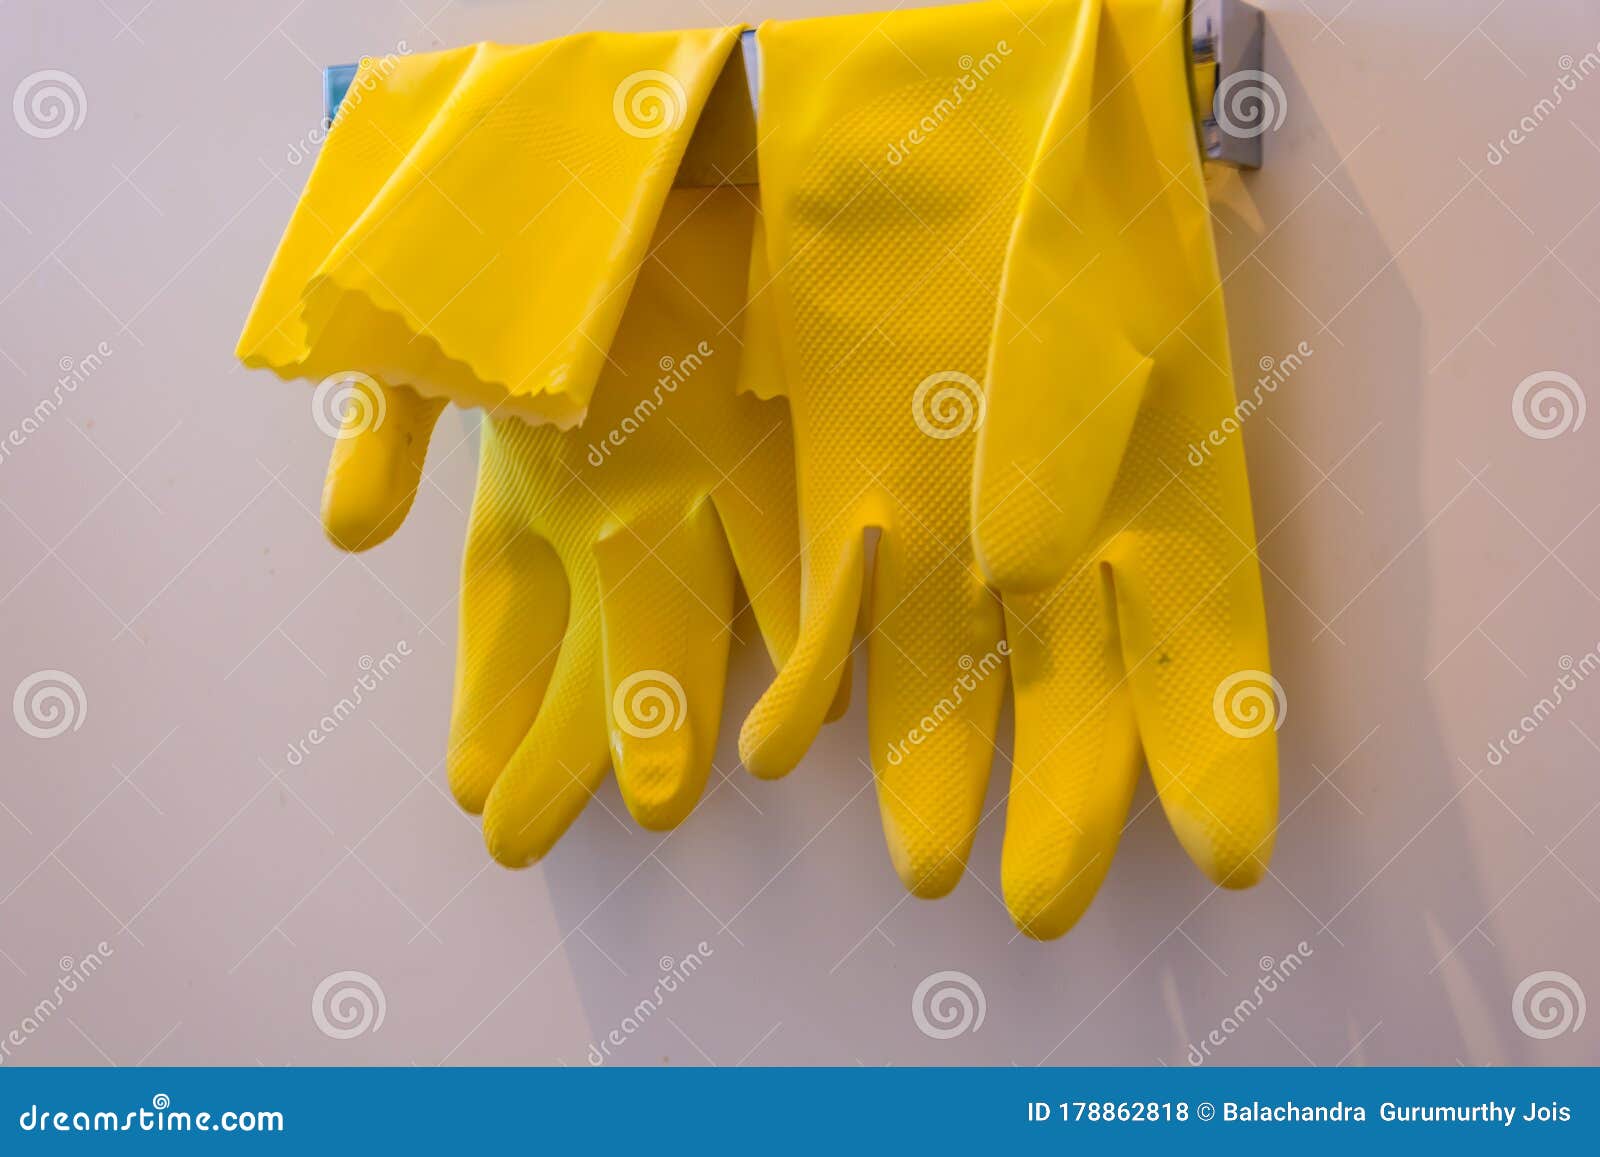 pair of yellow hand gloves hanging after cleanign home